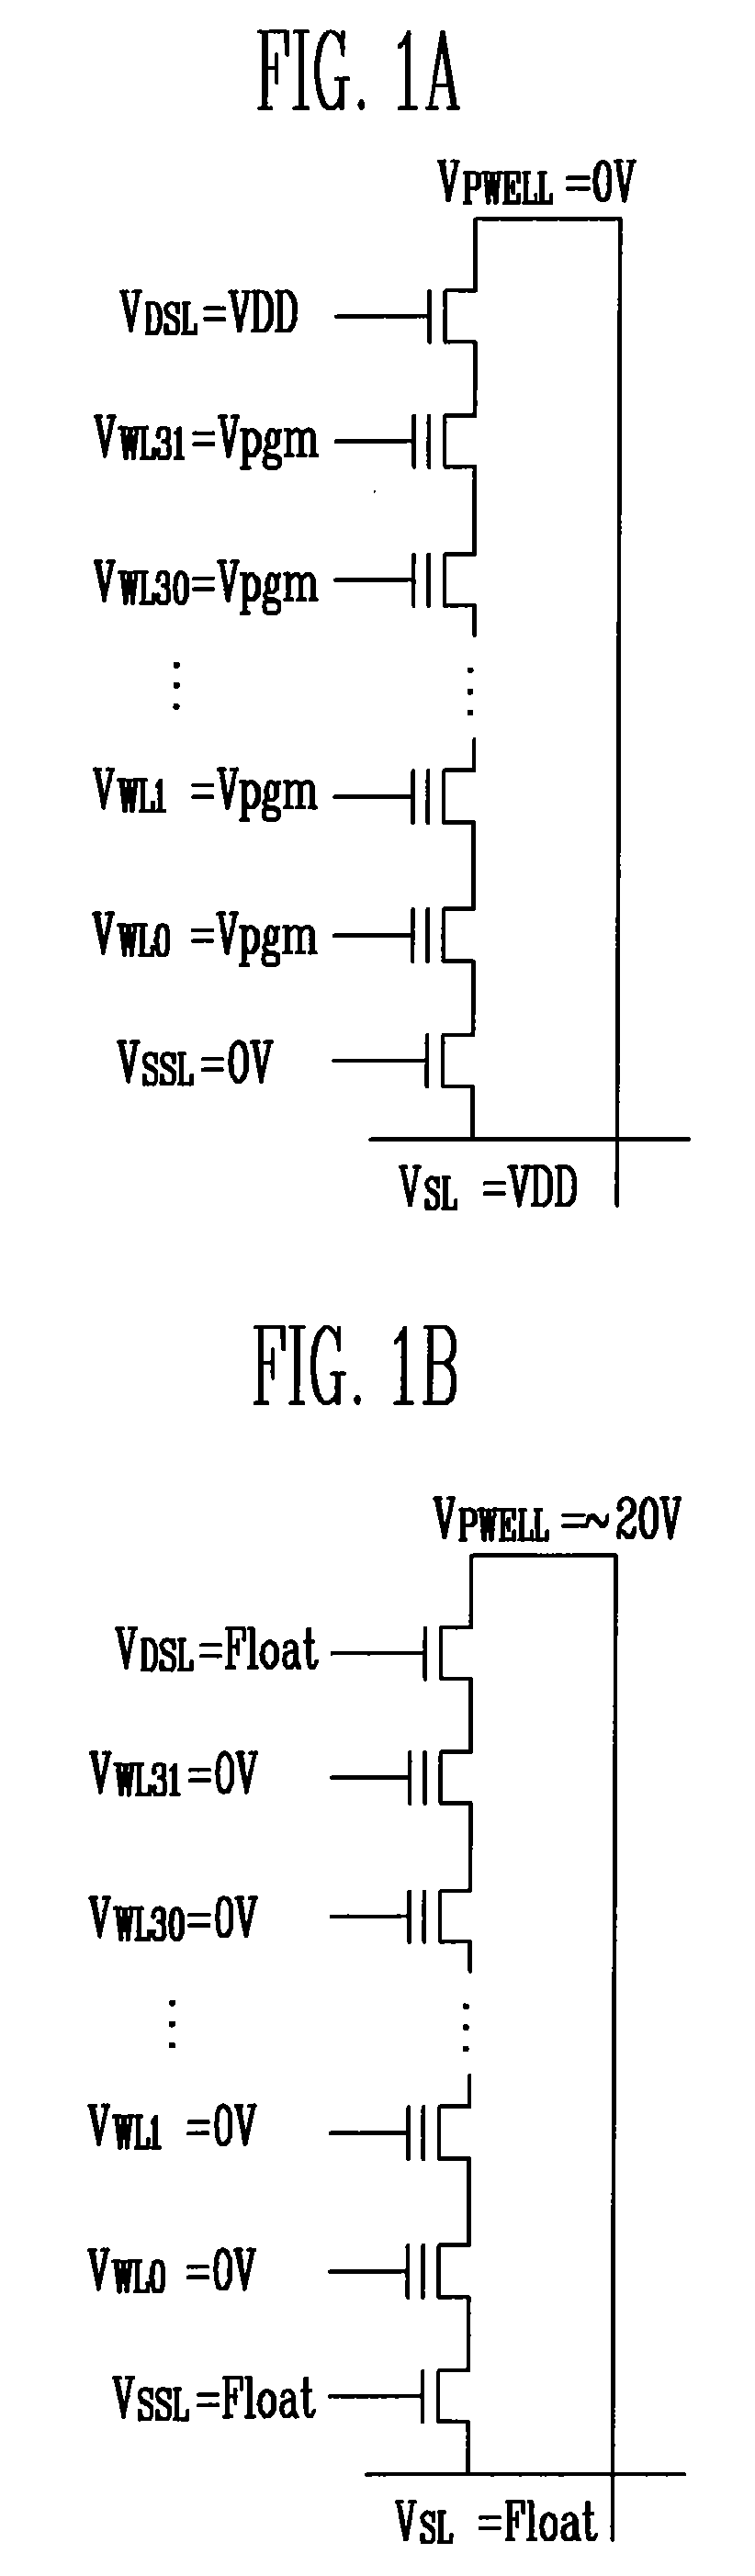 Method of performing an erase operation in a non-volatile memory device